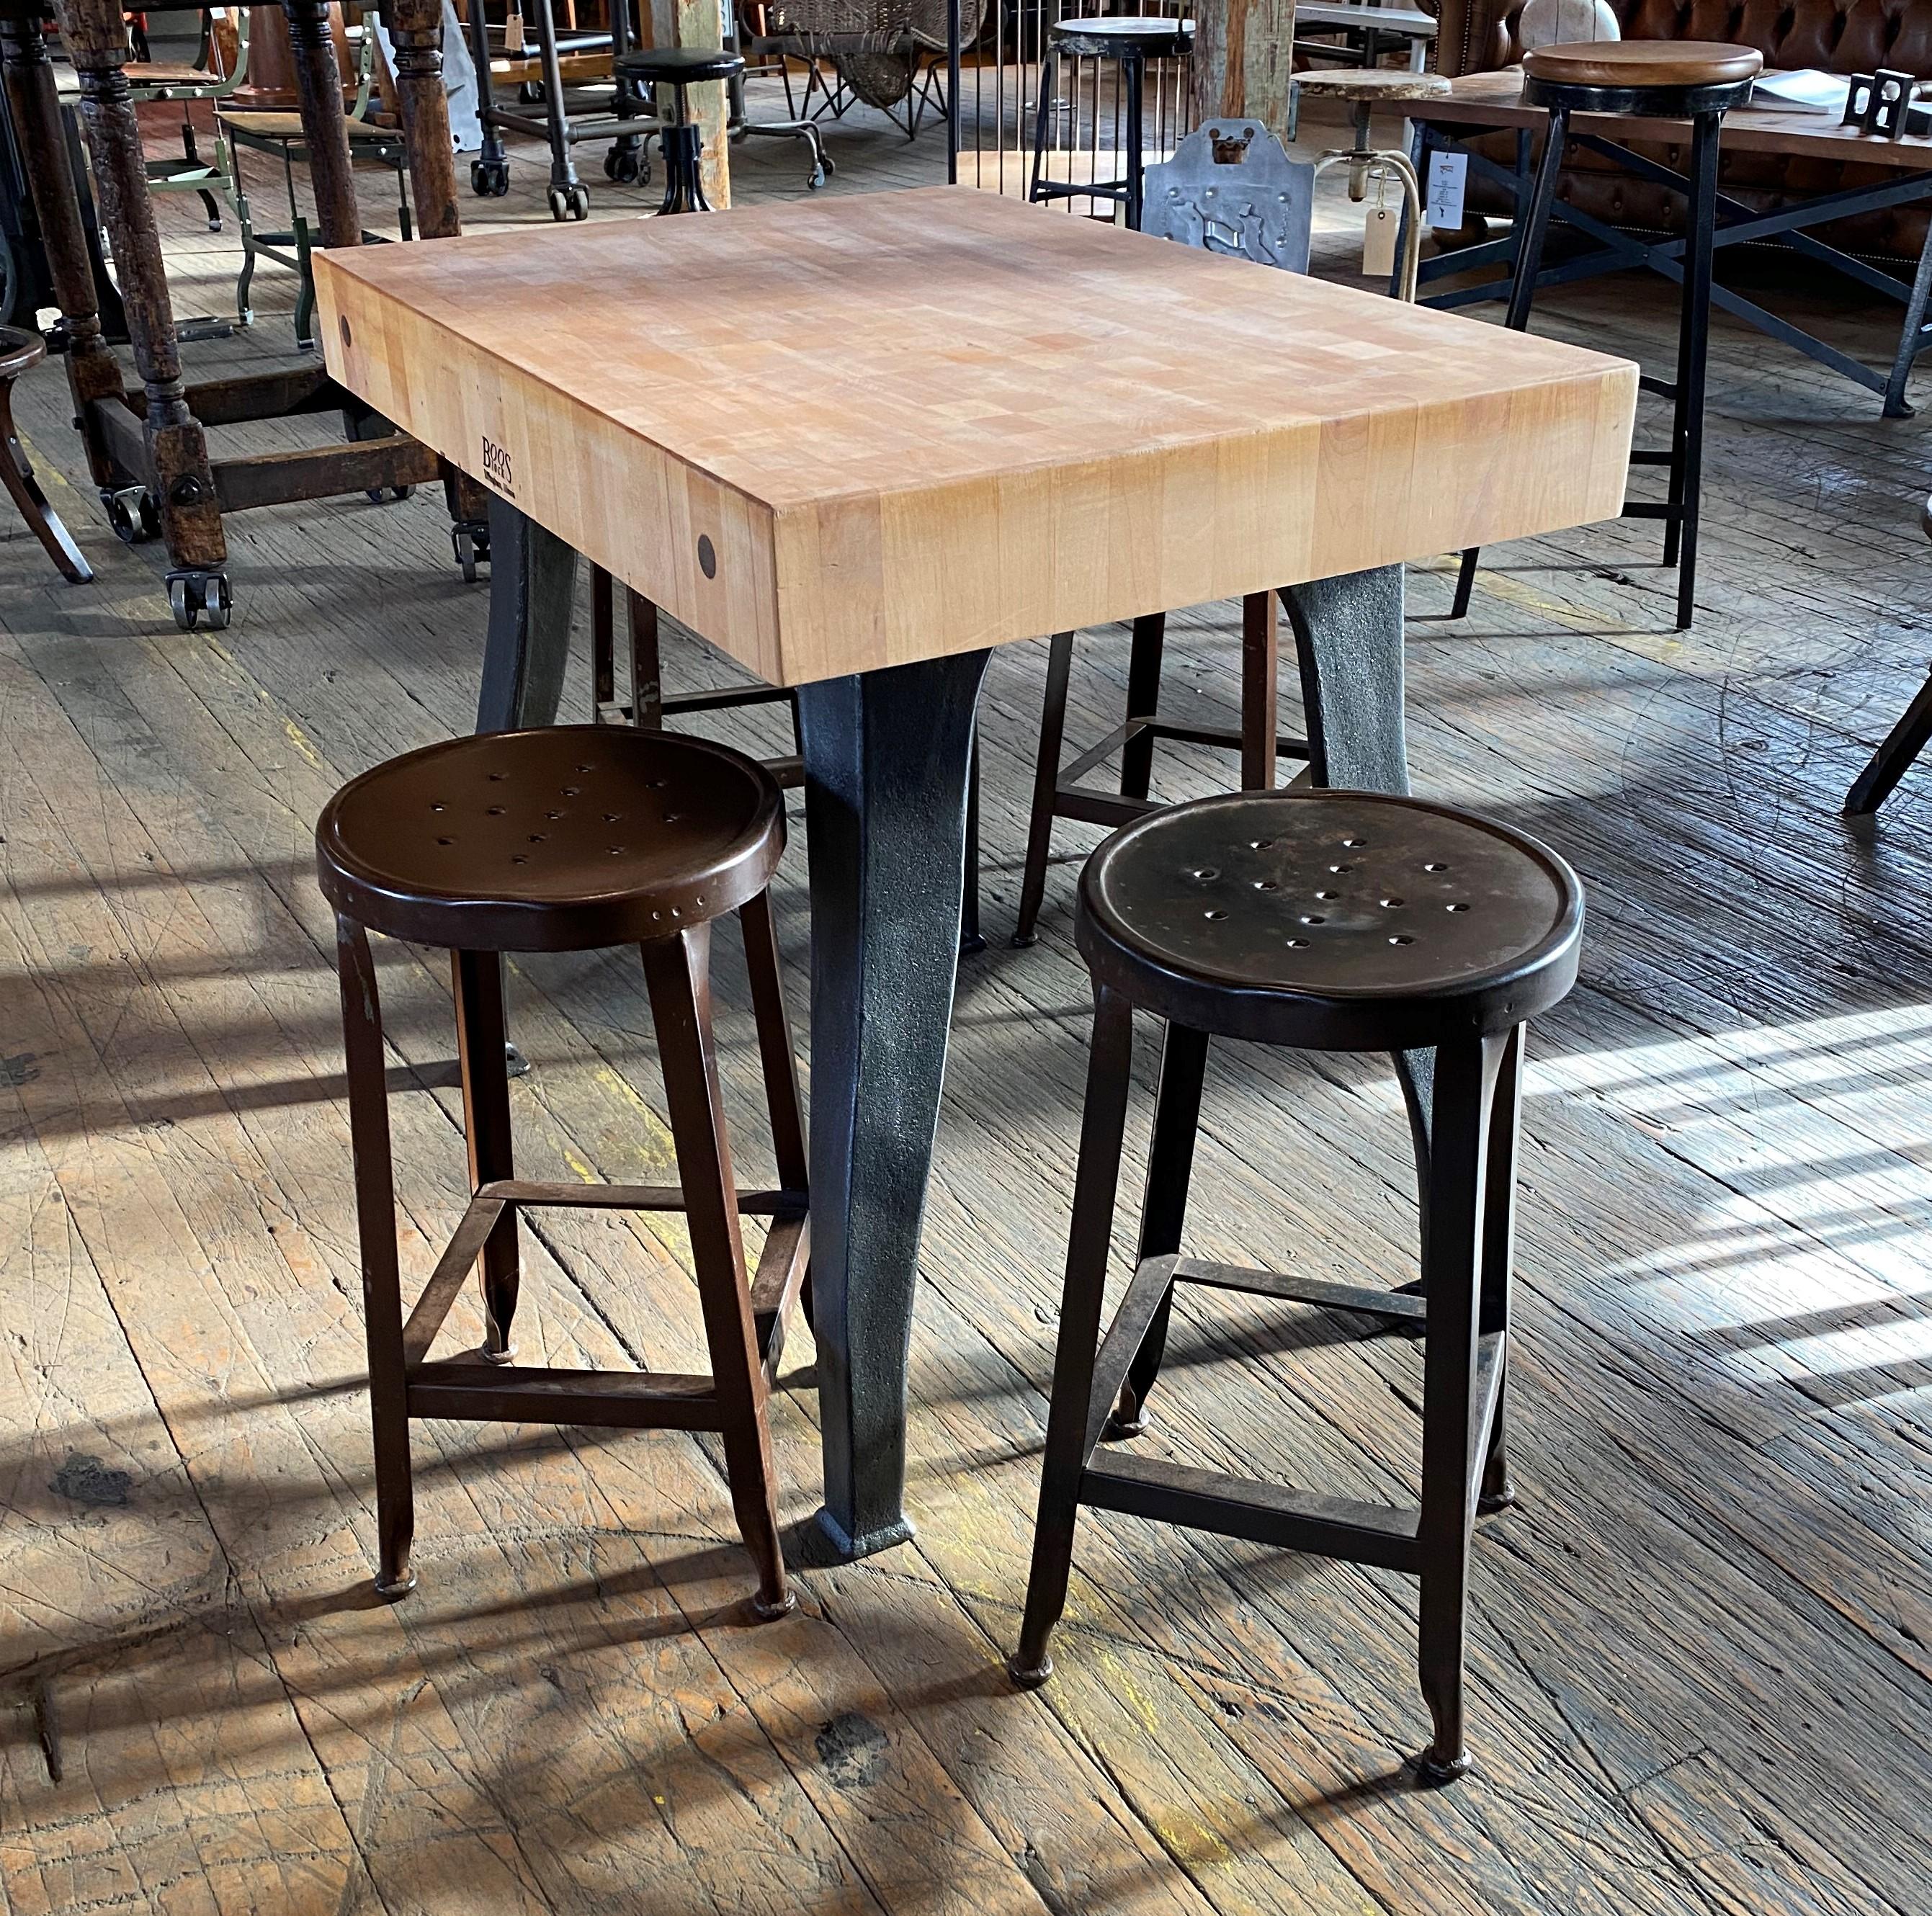 Maple butcher block and cast iron leg table

Overall dimensions: 25